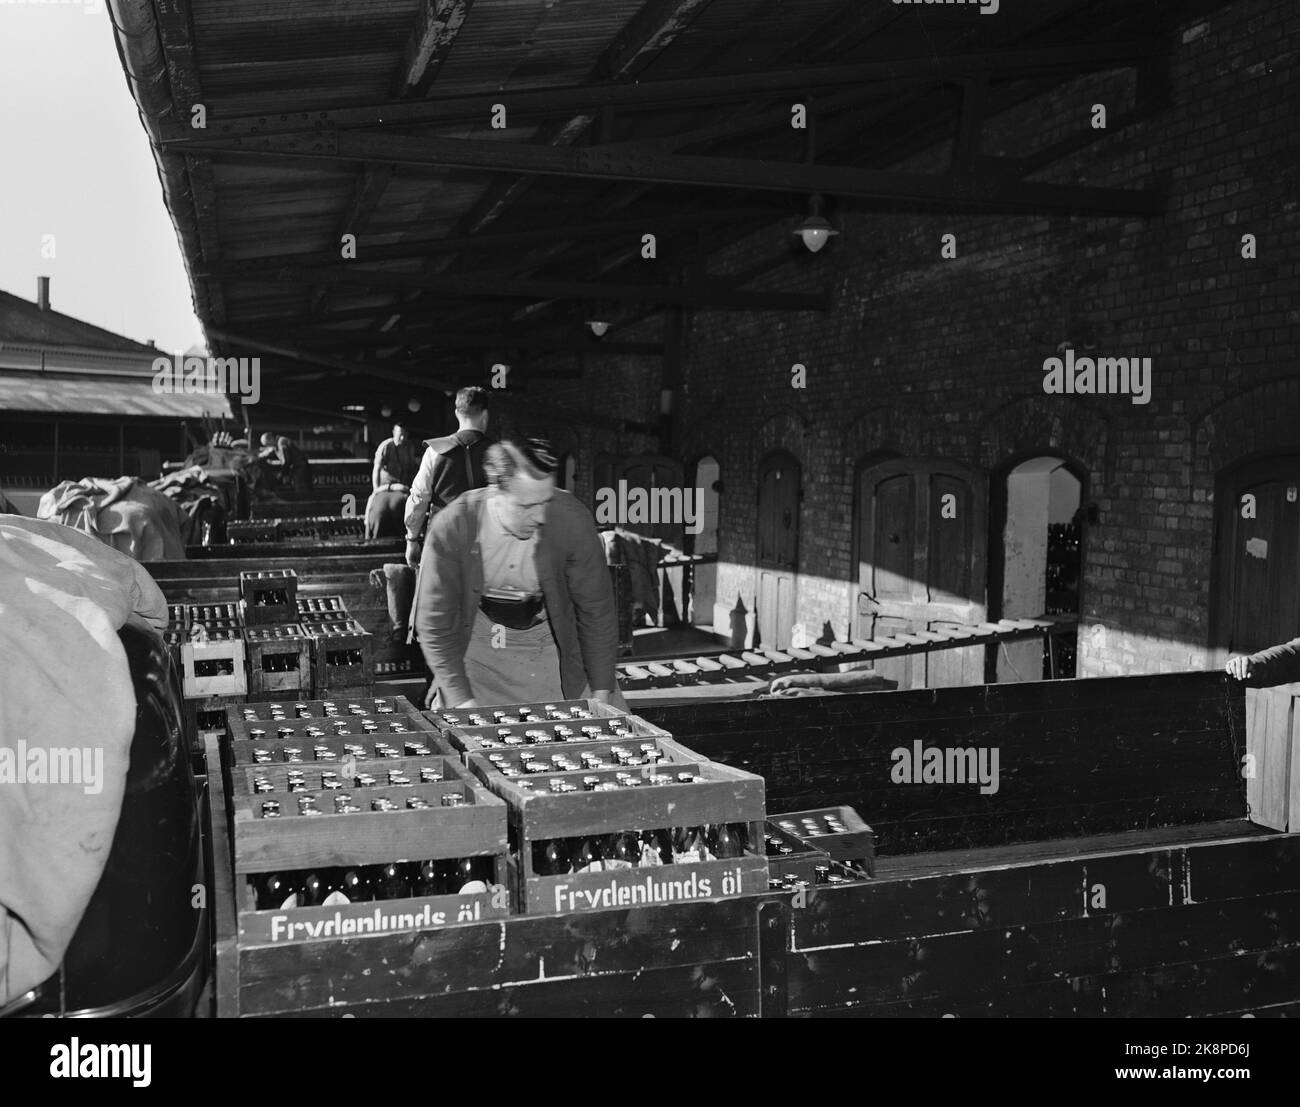 Oslo 1951. Breweries in Oslo in 1951. Here, beer boxes aboard trucks for exit to shops and restaurants in the Oslo area. Photo: Sverre A. Børretzen / Current / NTB  Breweries in Oslo in 1951. Cases of Beer Being Loaded Onto Trucks for Distribution To Shops and Restaurants in the Oslo-Aarea. Photo: Sverre A. Børretzen/ Current/ NTB. Stock Photo